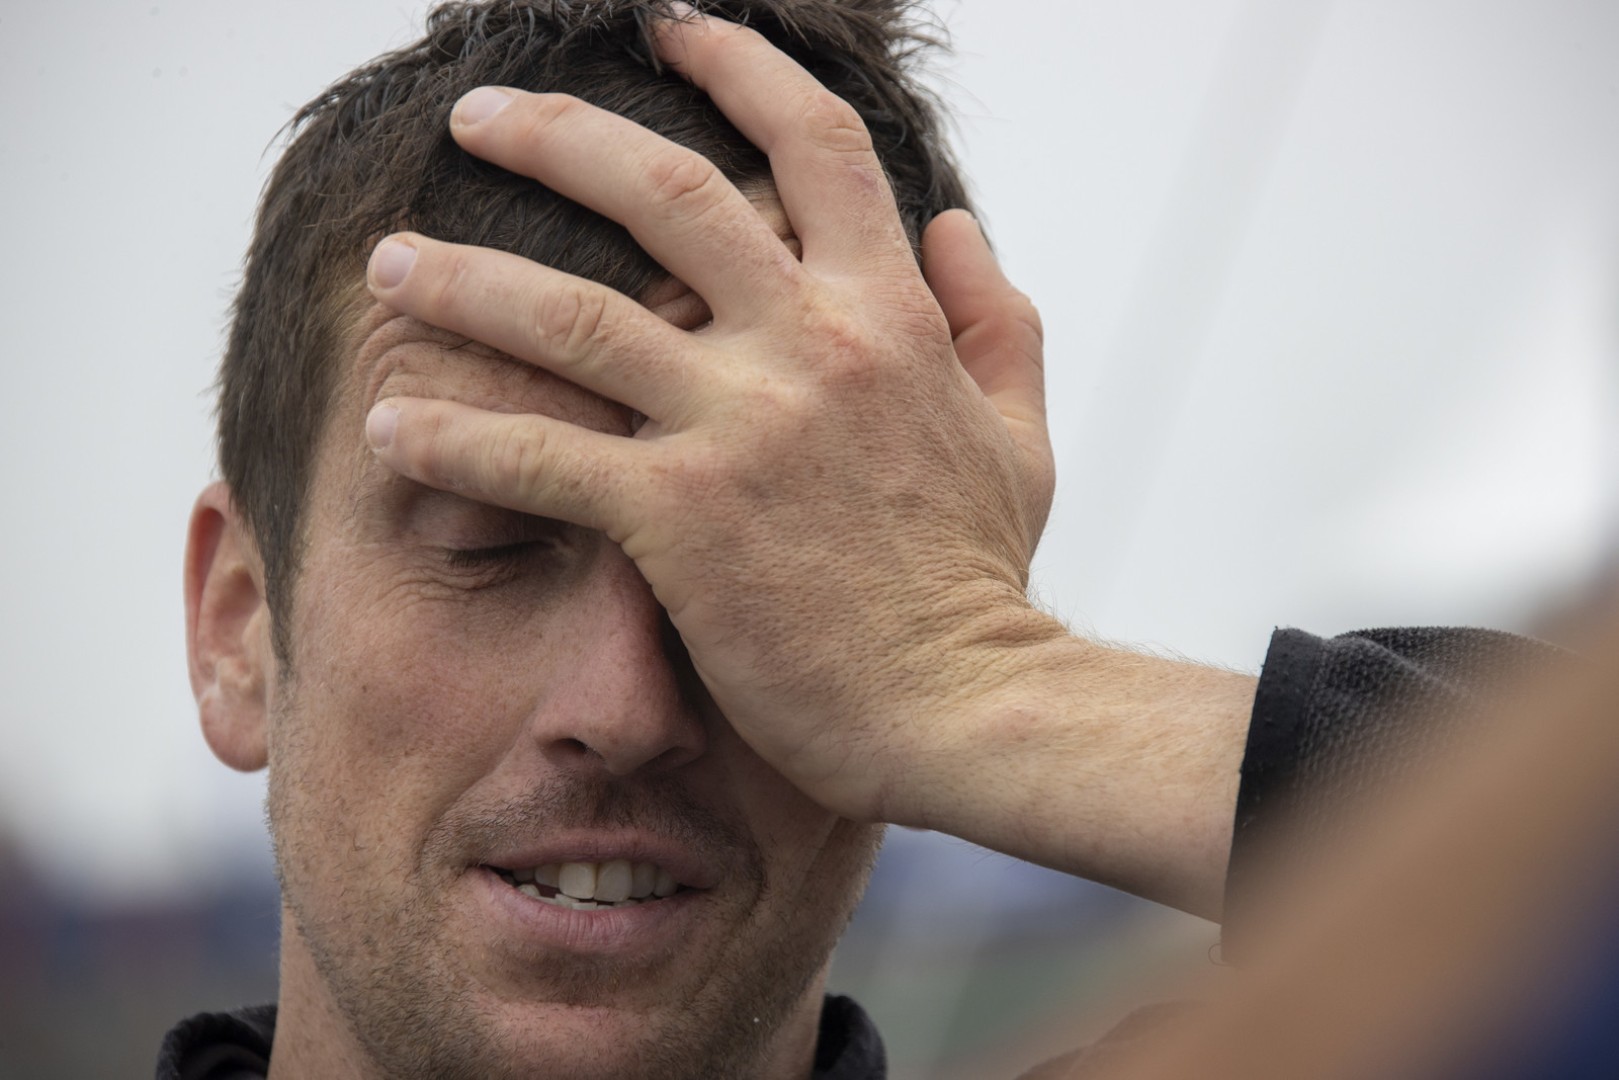 Disappointment and extreme fatigue etched on the face of Irish skipper Tom Dolan 

Photo ©Alexis Courcoux